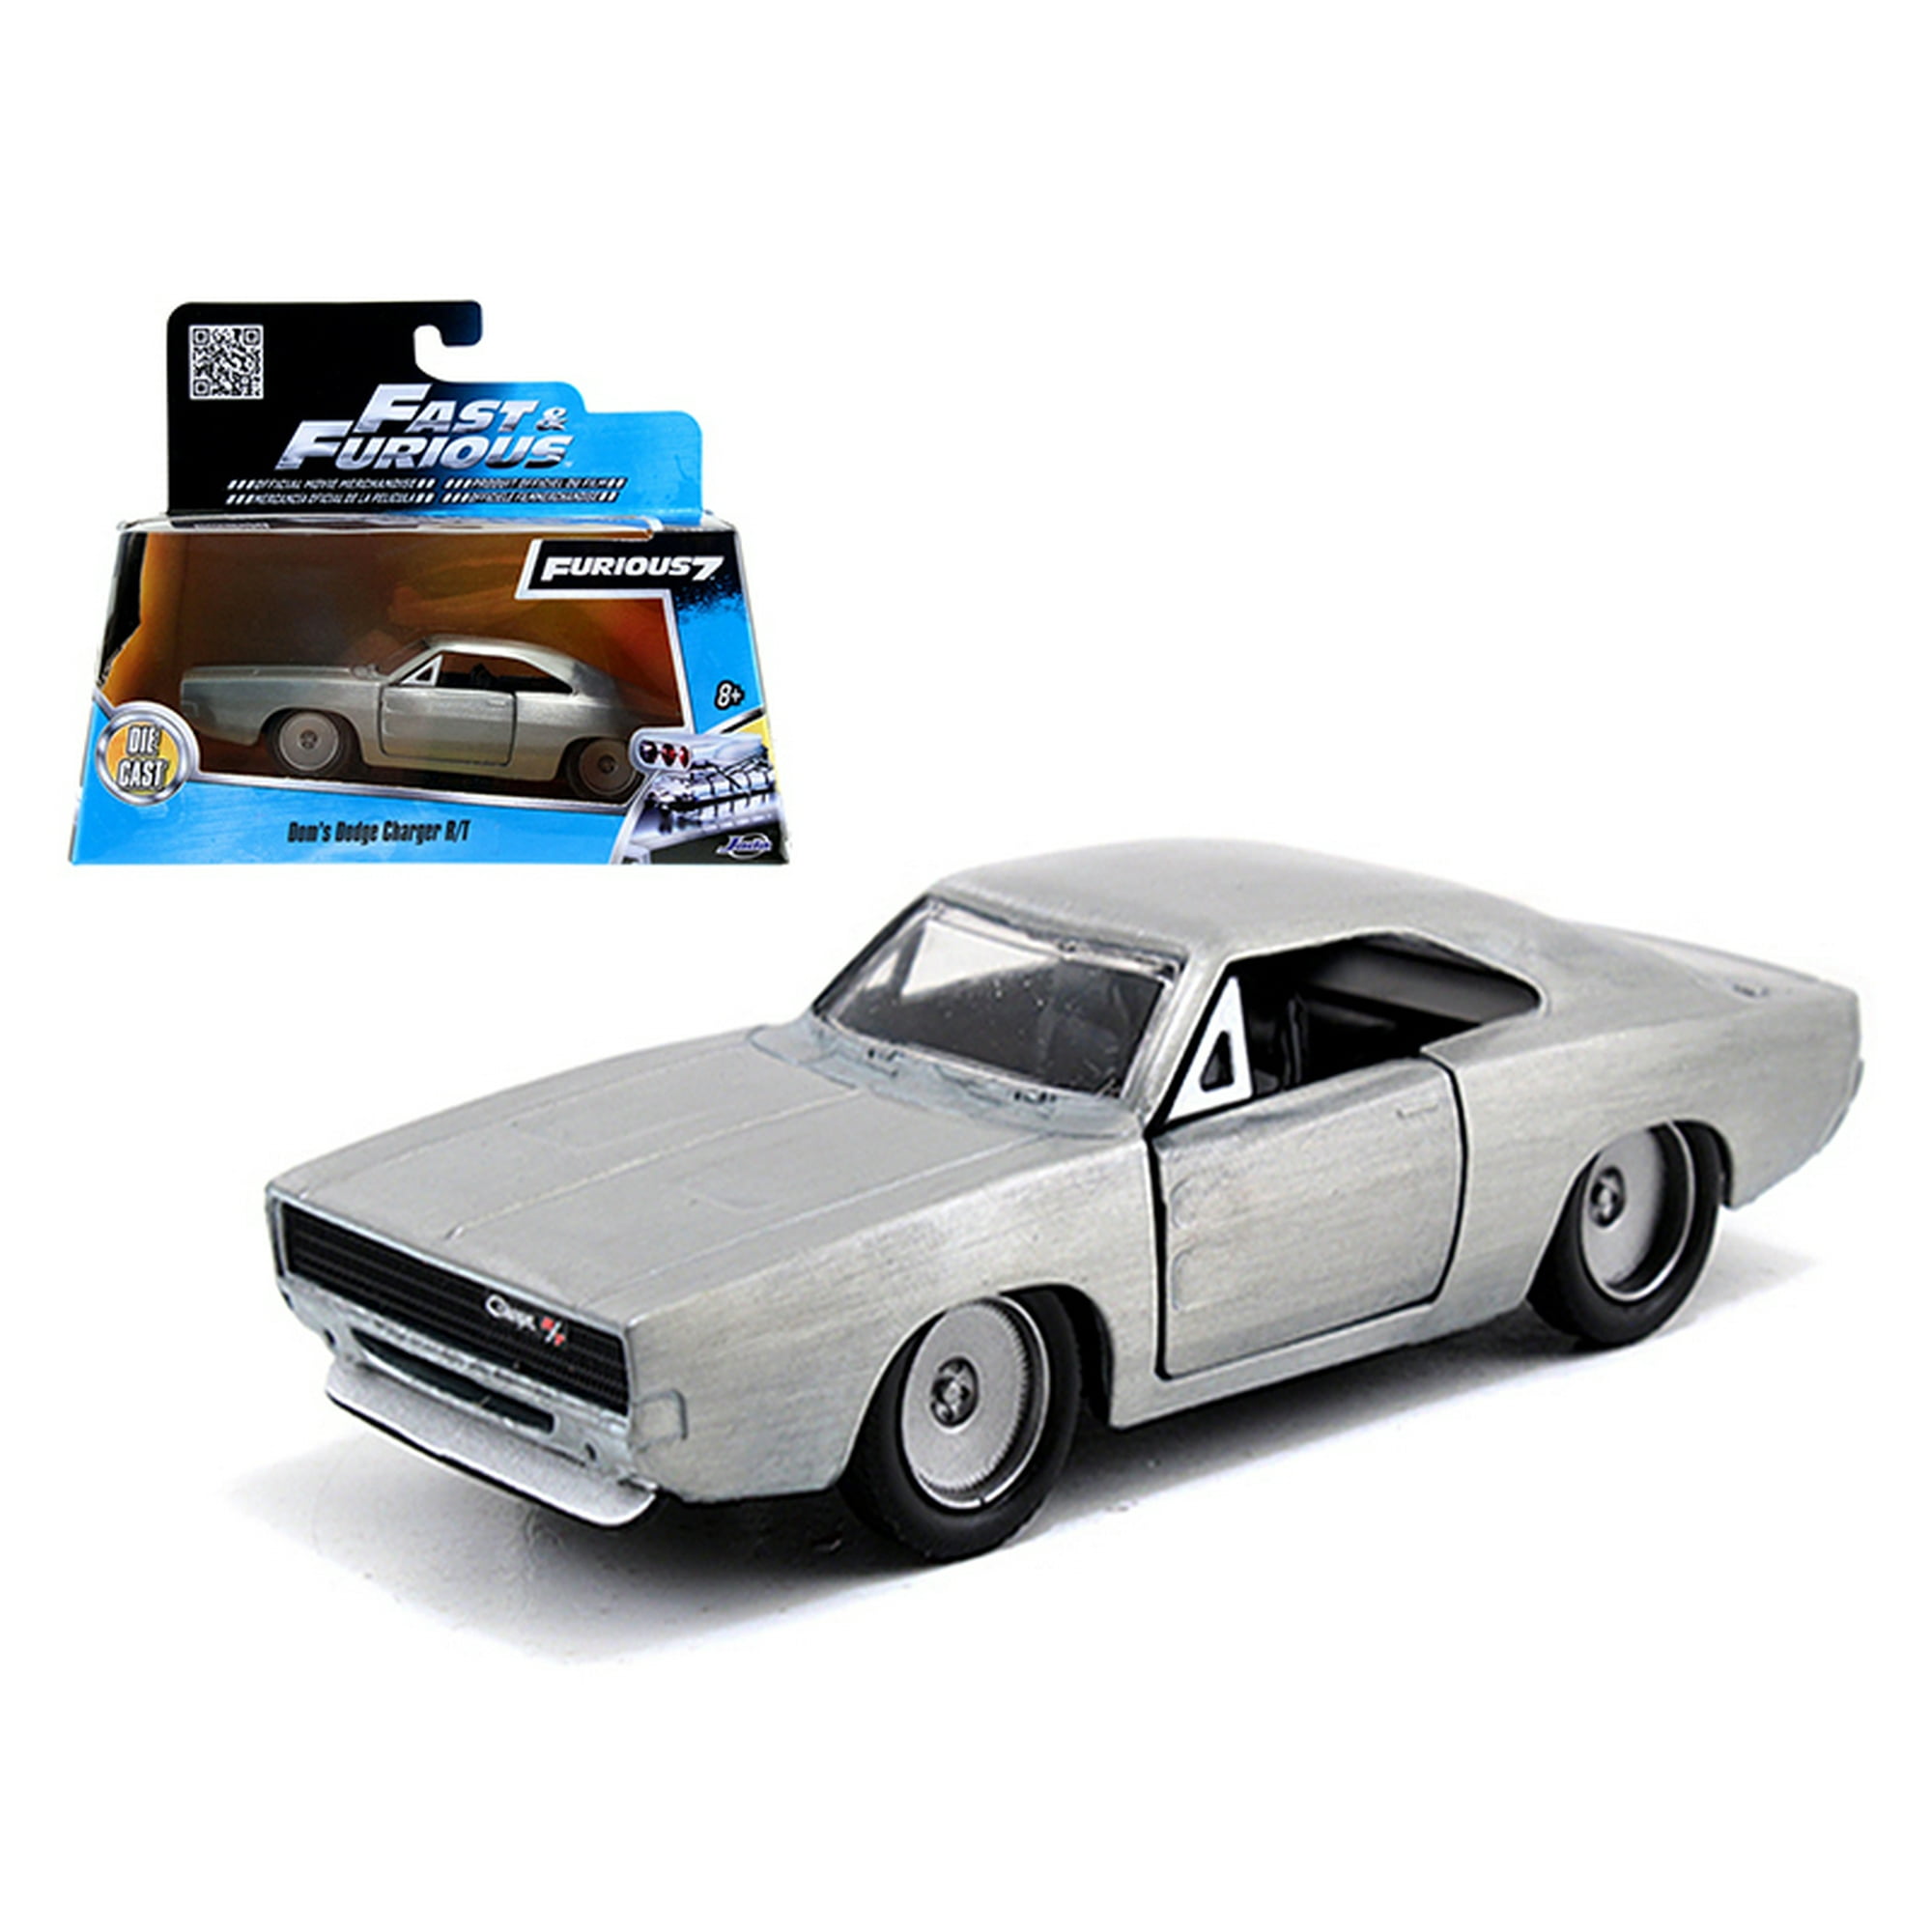 Doms Dodge Charger Rt Bare Metal Fast Furious 7 Movie 132 Diecast Model Car By Jada